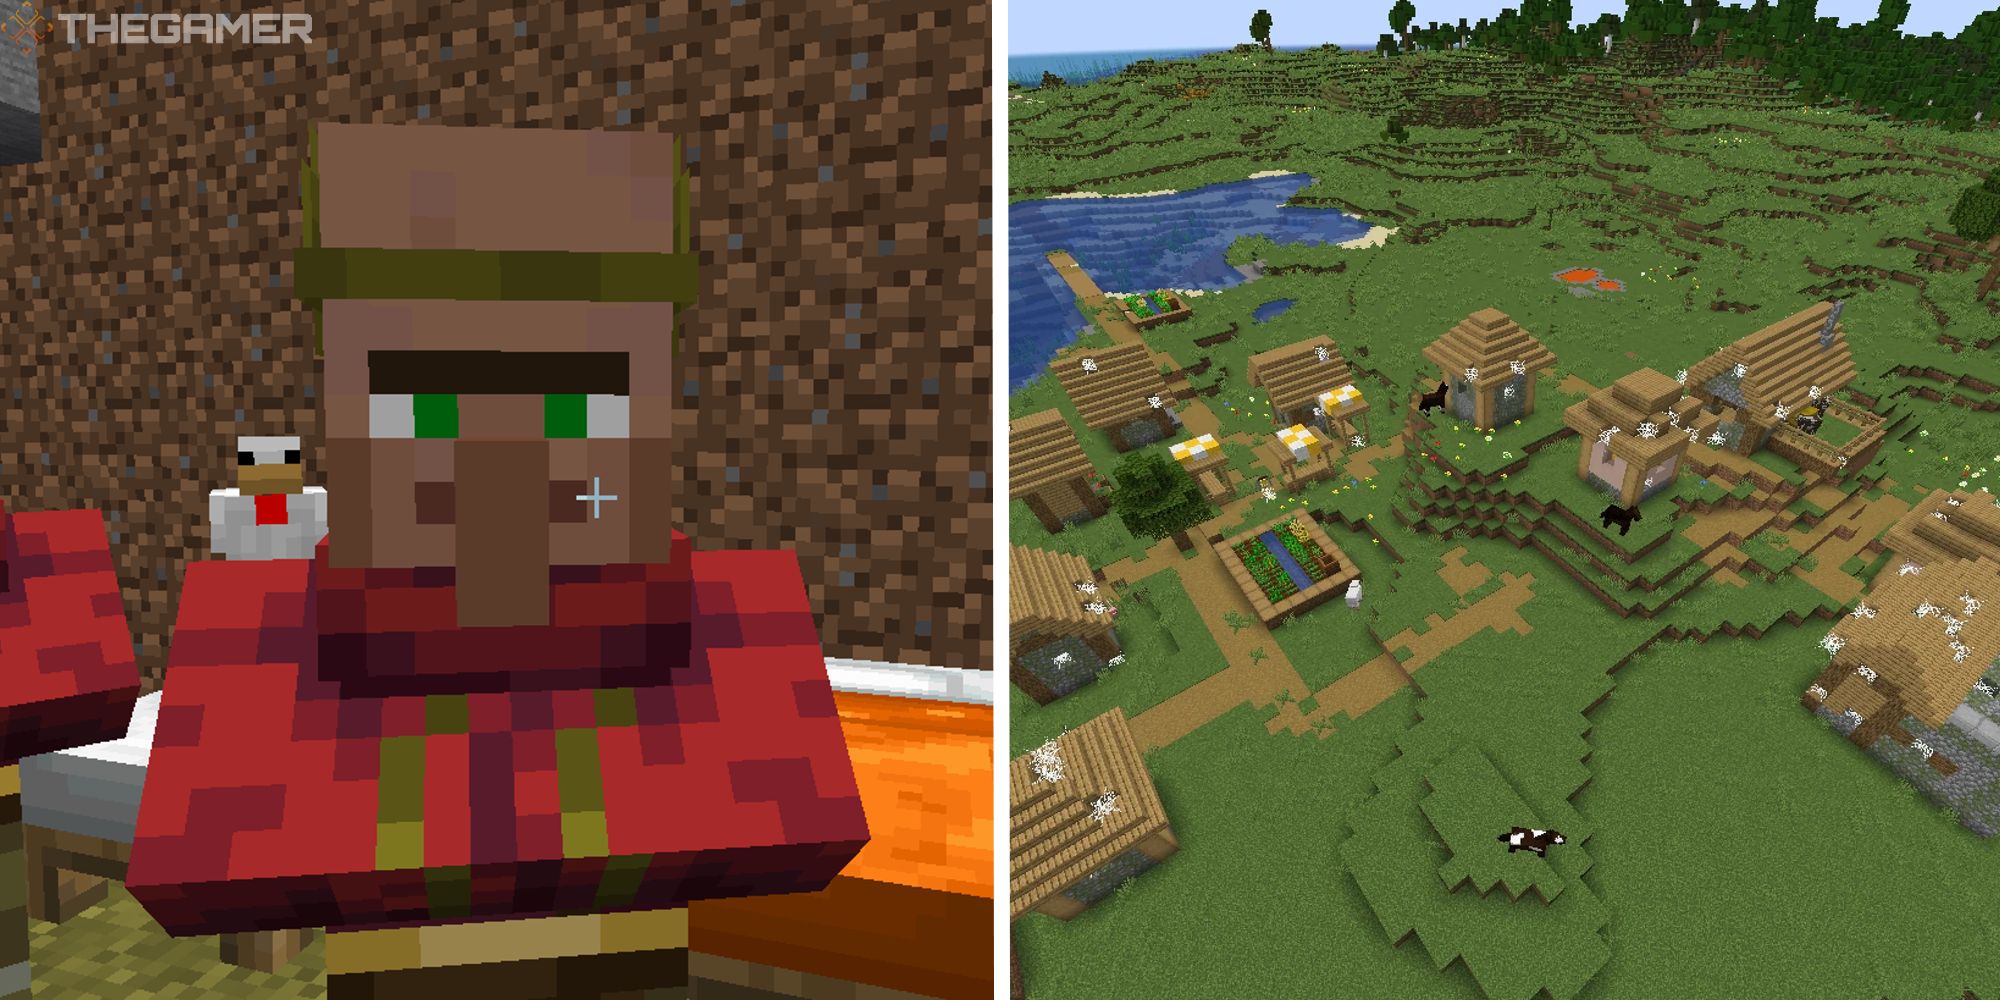 split image showing minecraft villager and village from above